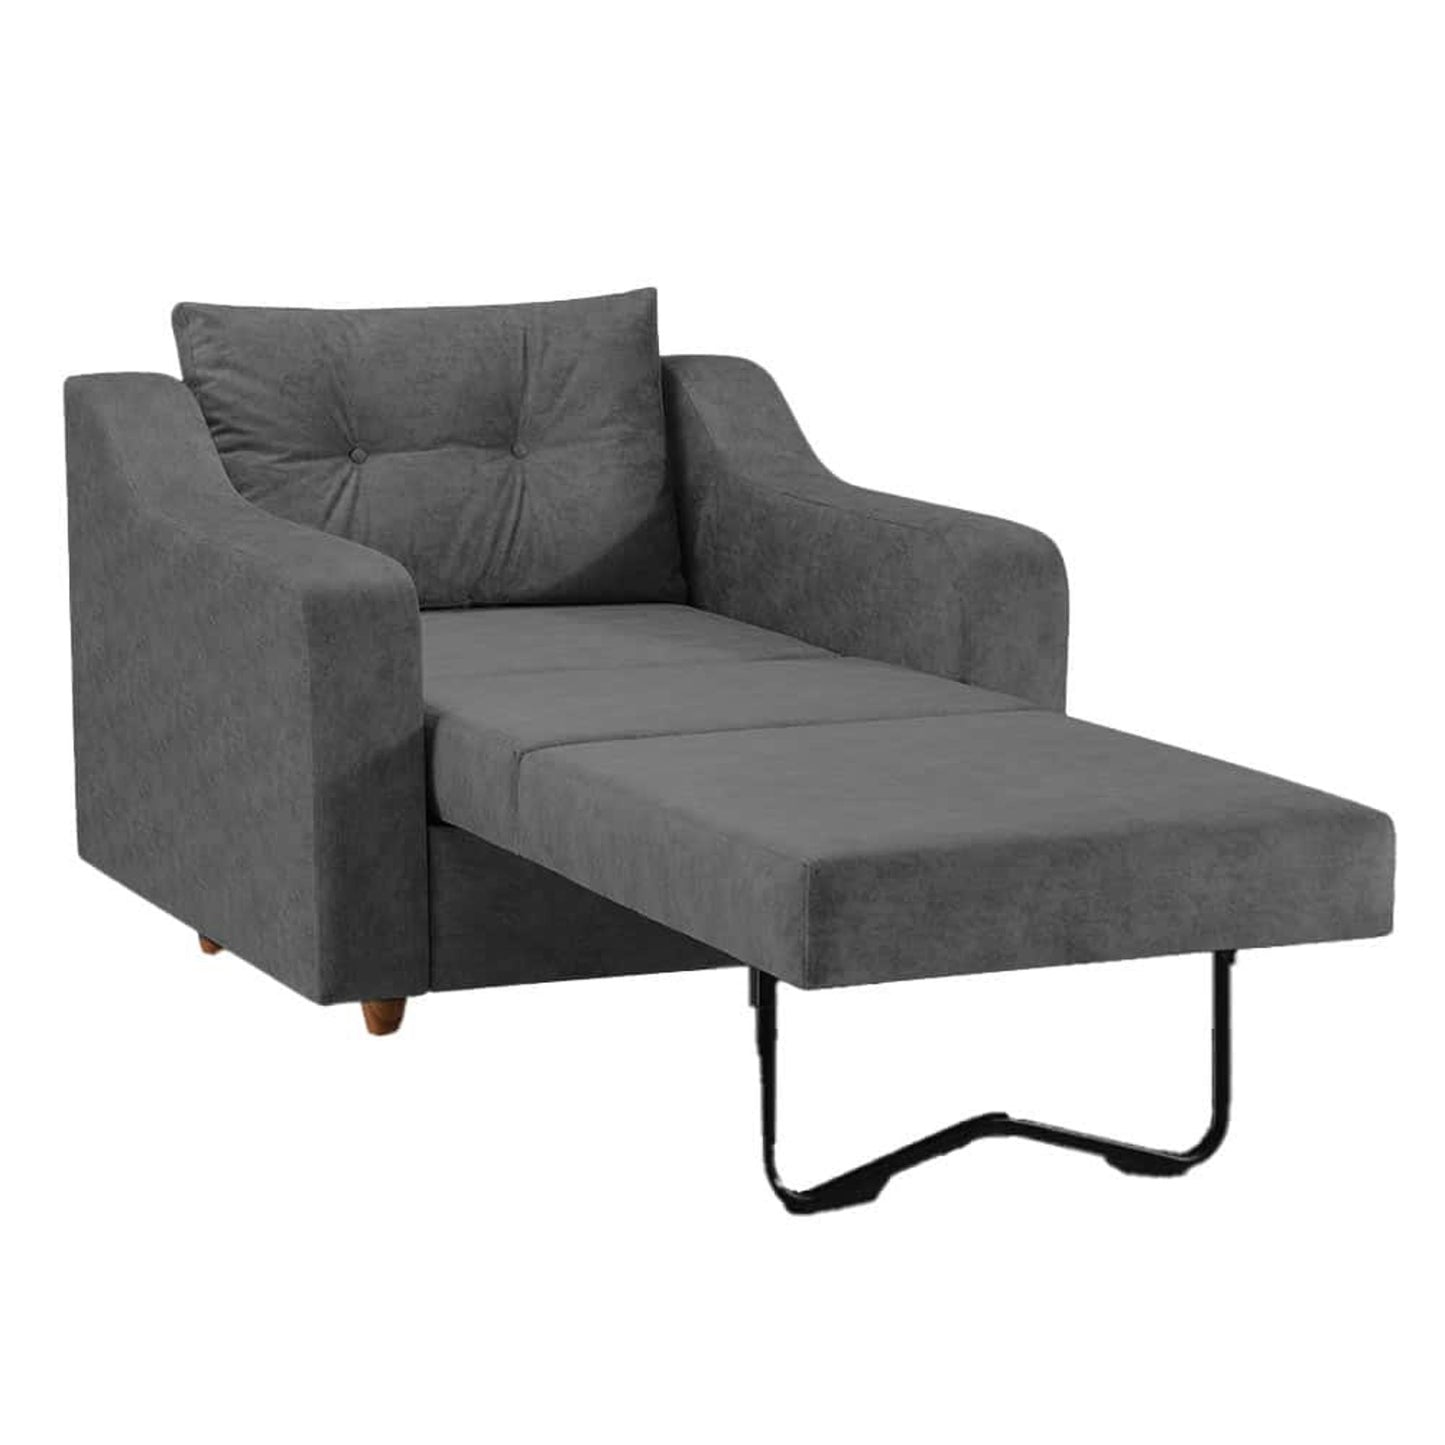 Leo Chair Bed in Dark Gray Fabric